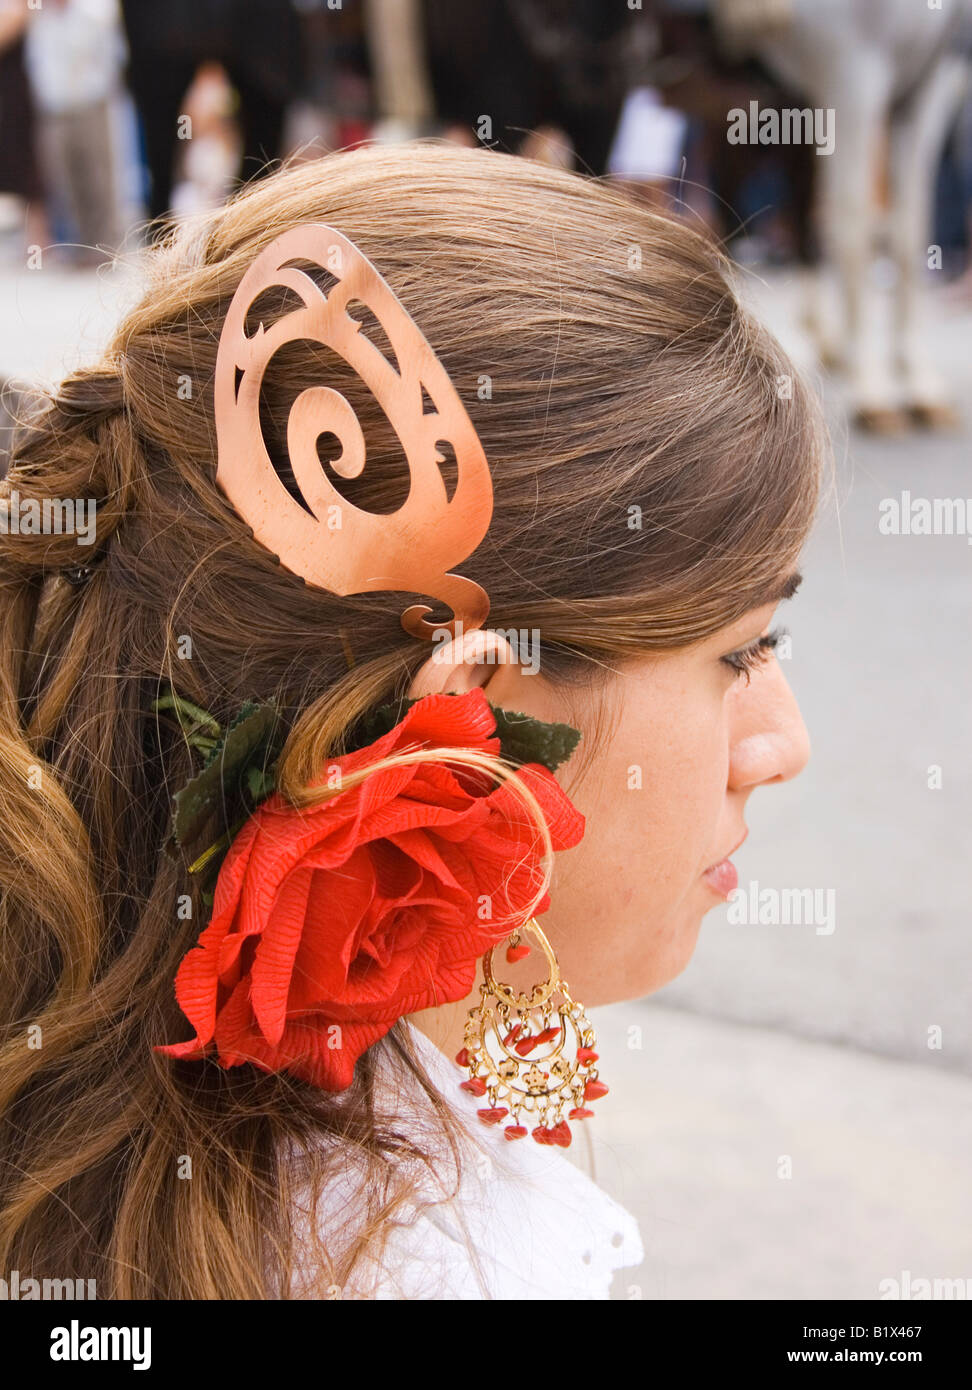 One young girl in typical Spanish dress with red flower decoration in hair Stock Photo